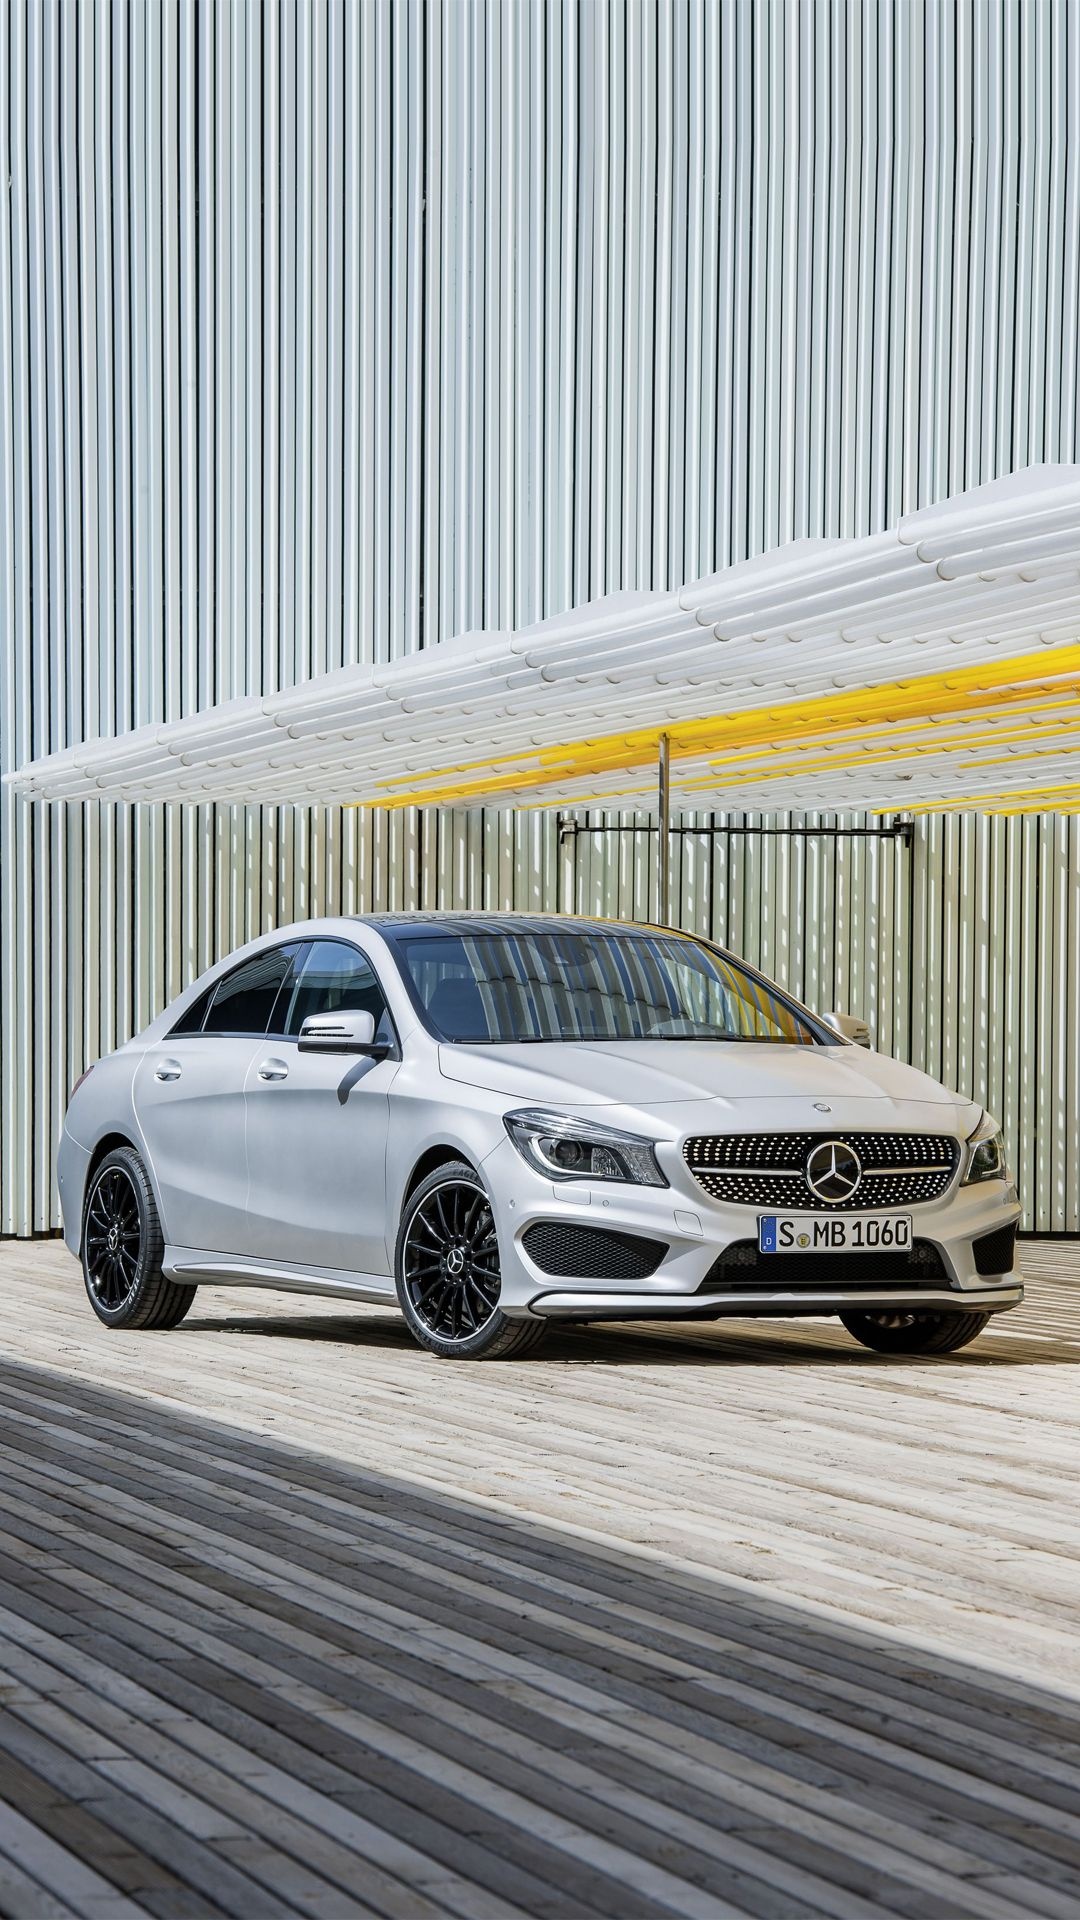 Mercedes-Benz CLA, Mercedes CLA 45 wallpapers, Top free backgrounds, 1080x1920 Full HD Phone